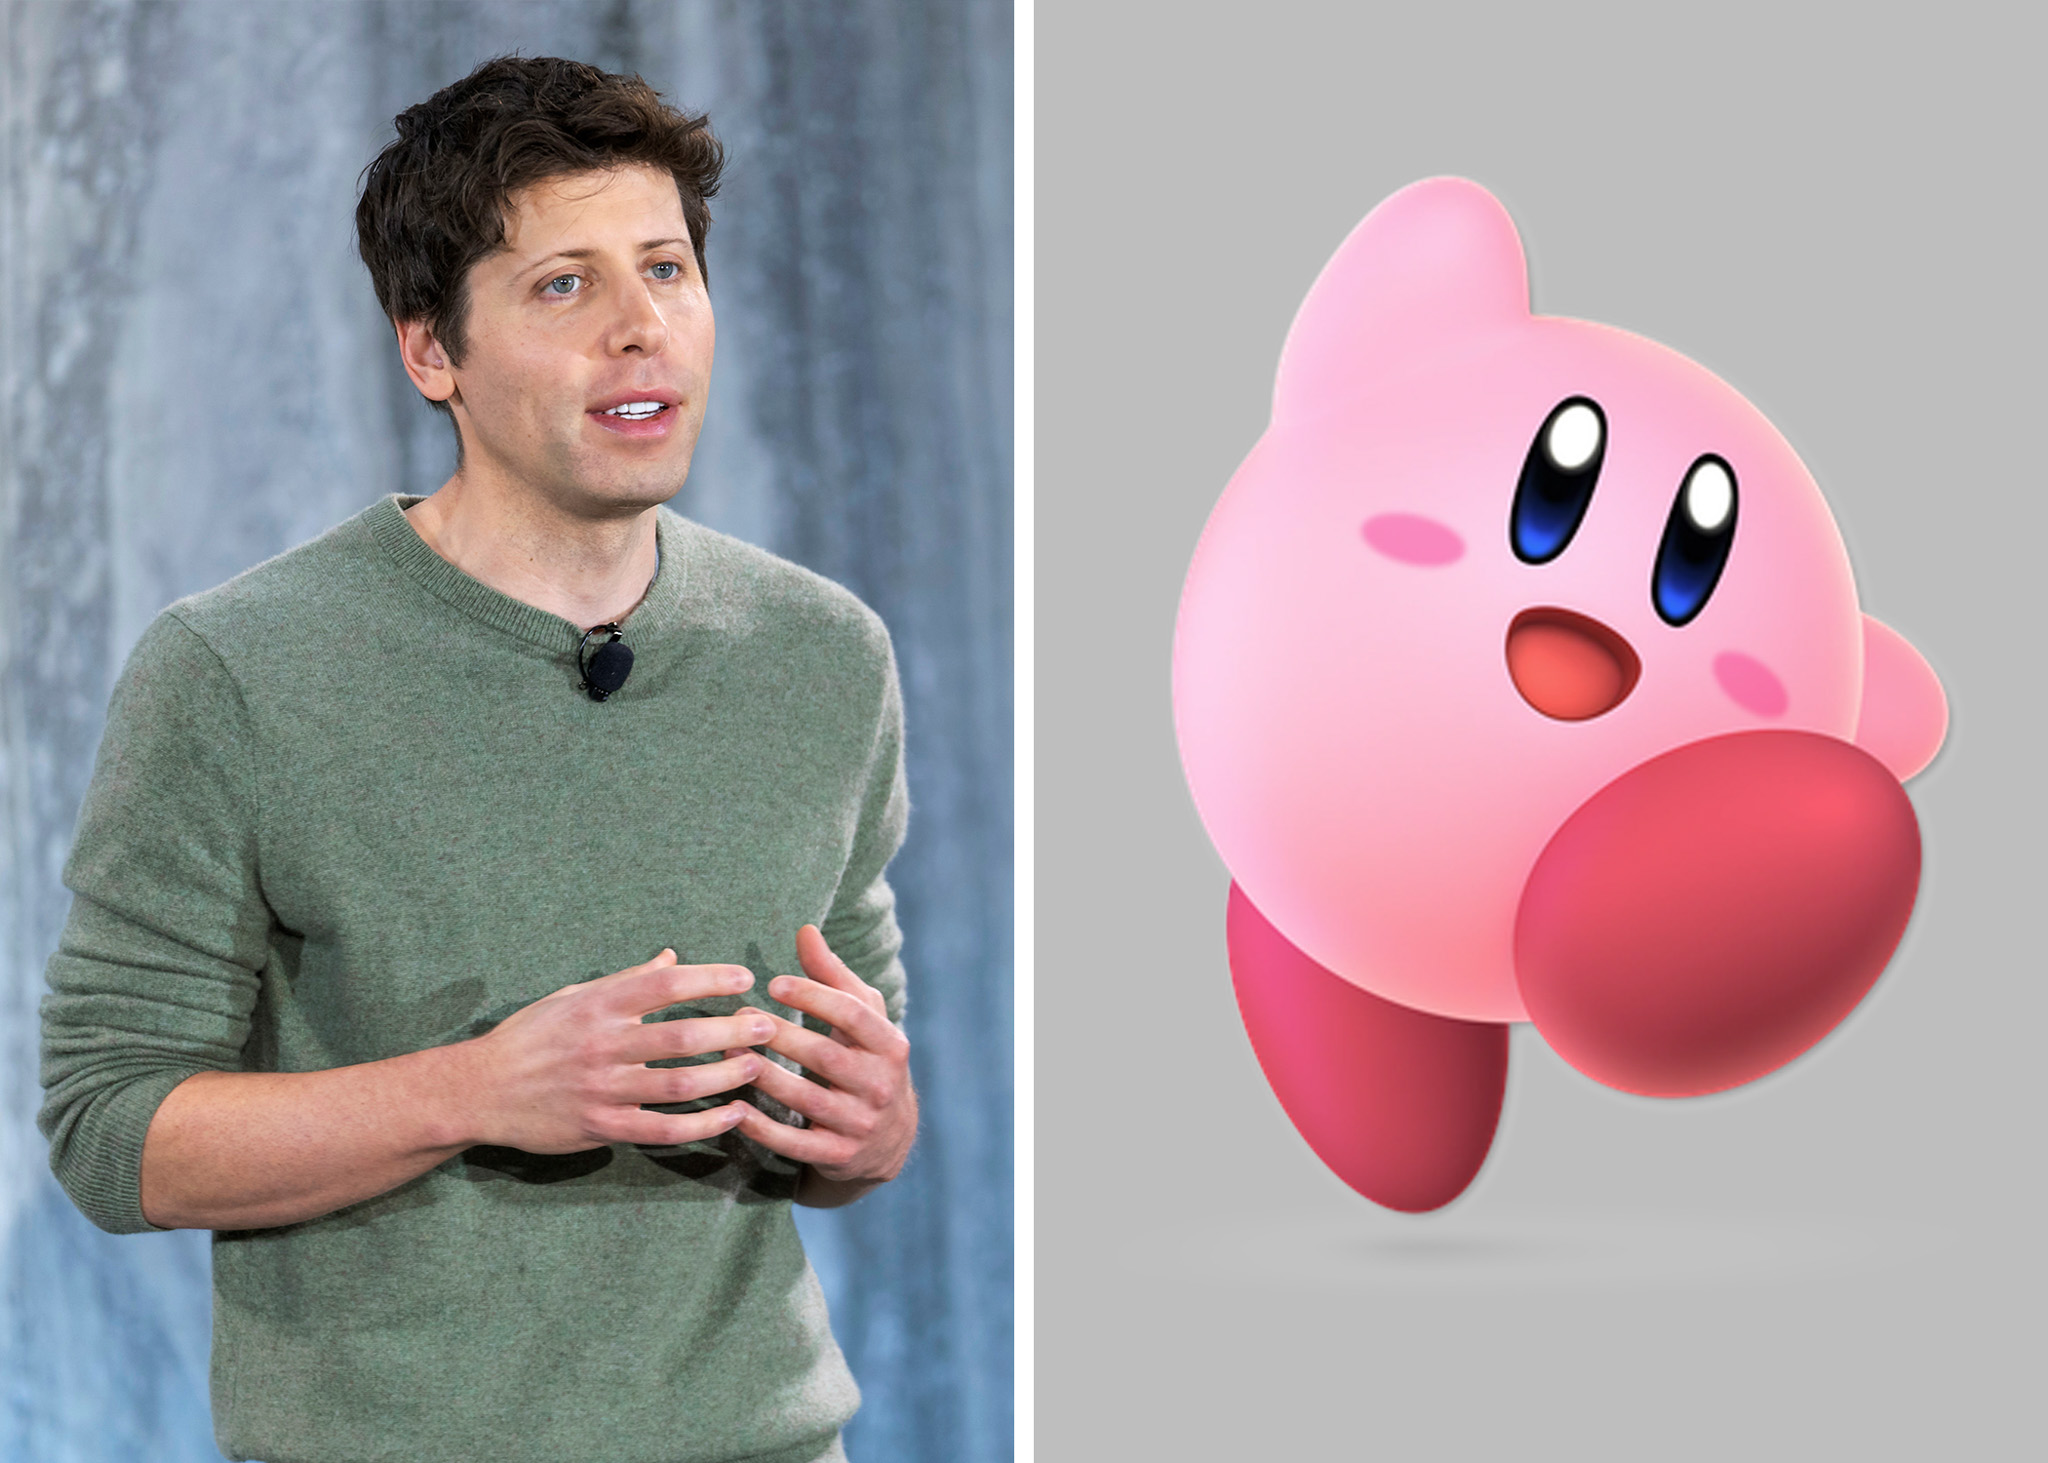 The image is split into two parts: on the left is a man wearing a green sweater, speaking, and on the right is an animated pink character with oval eyes and rosy cheeks.